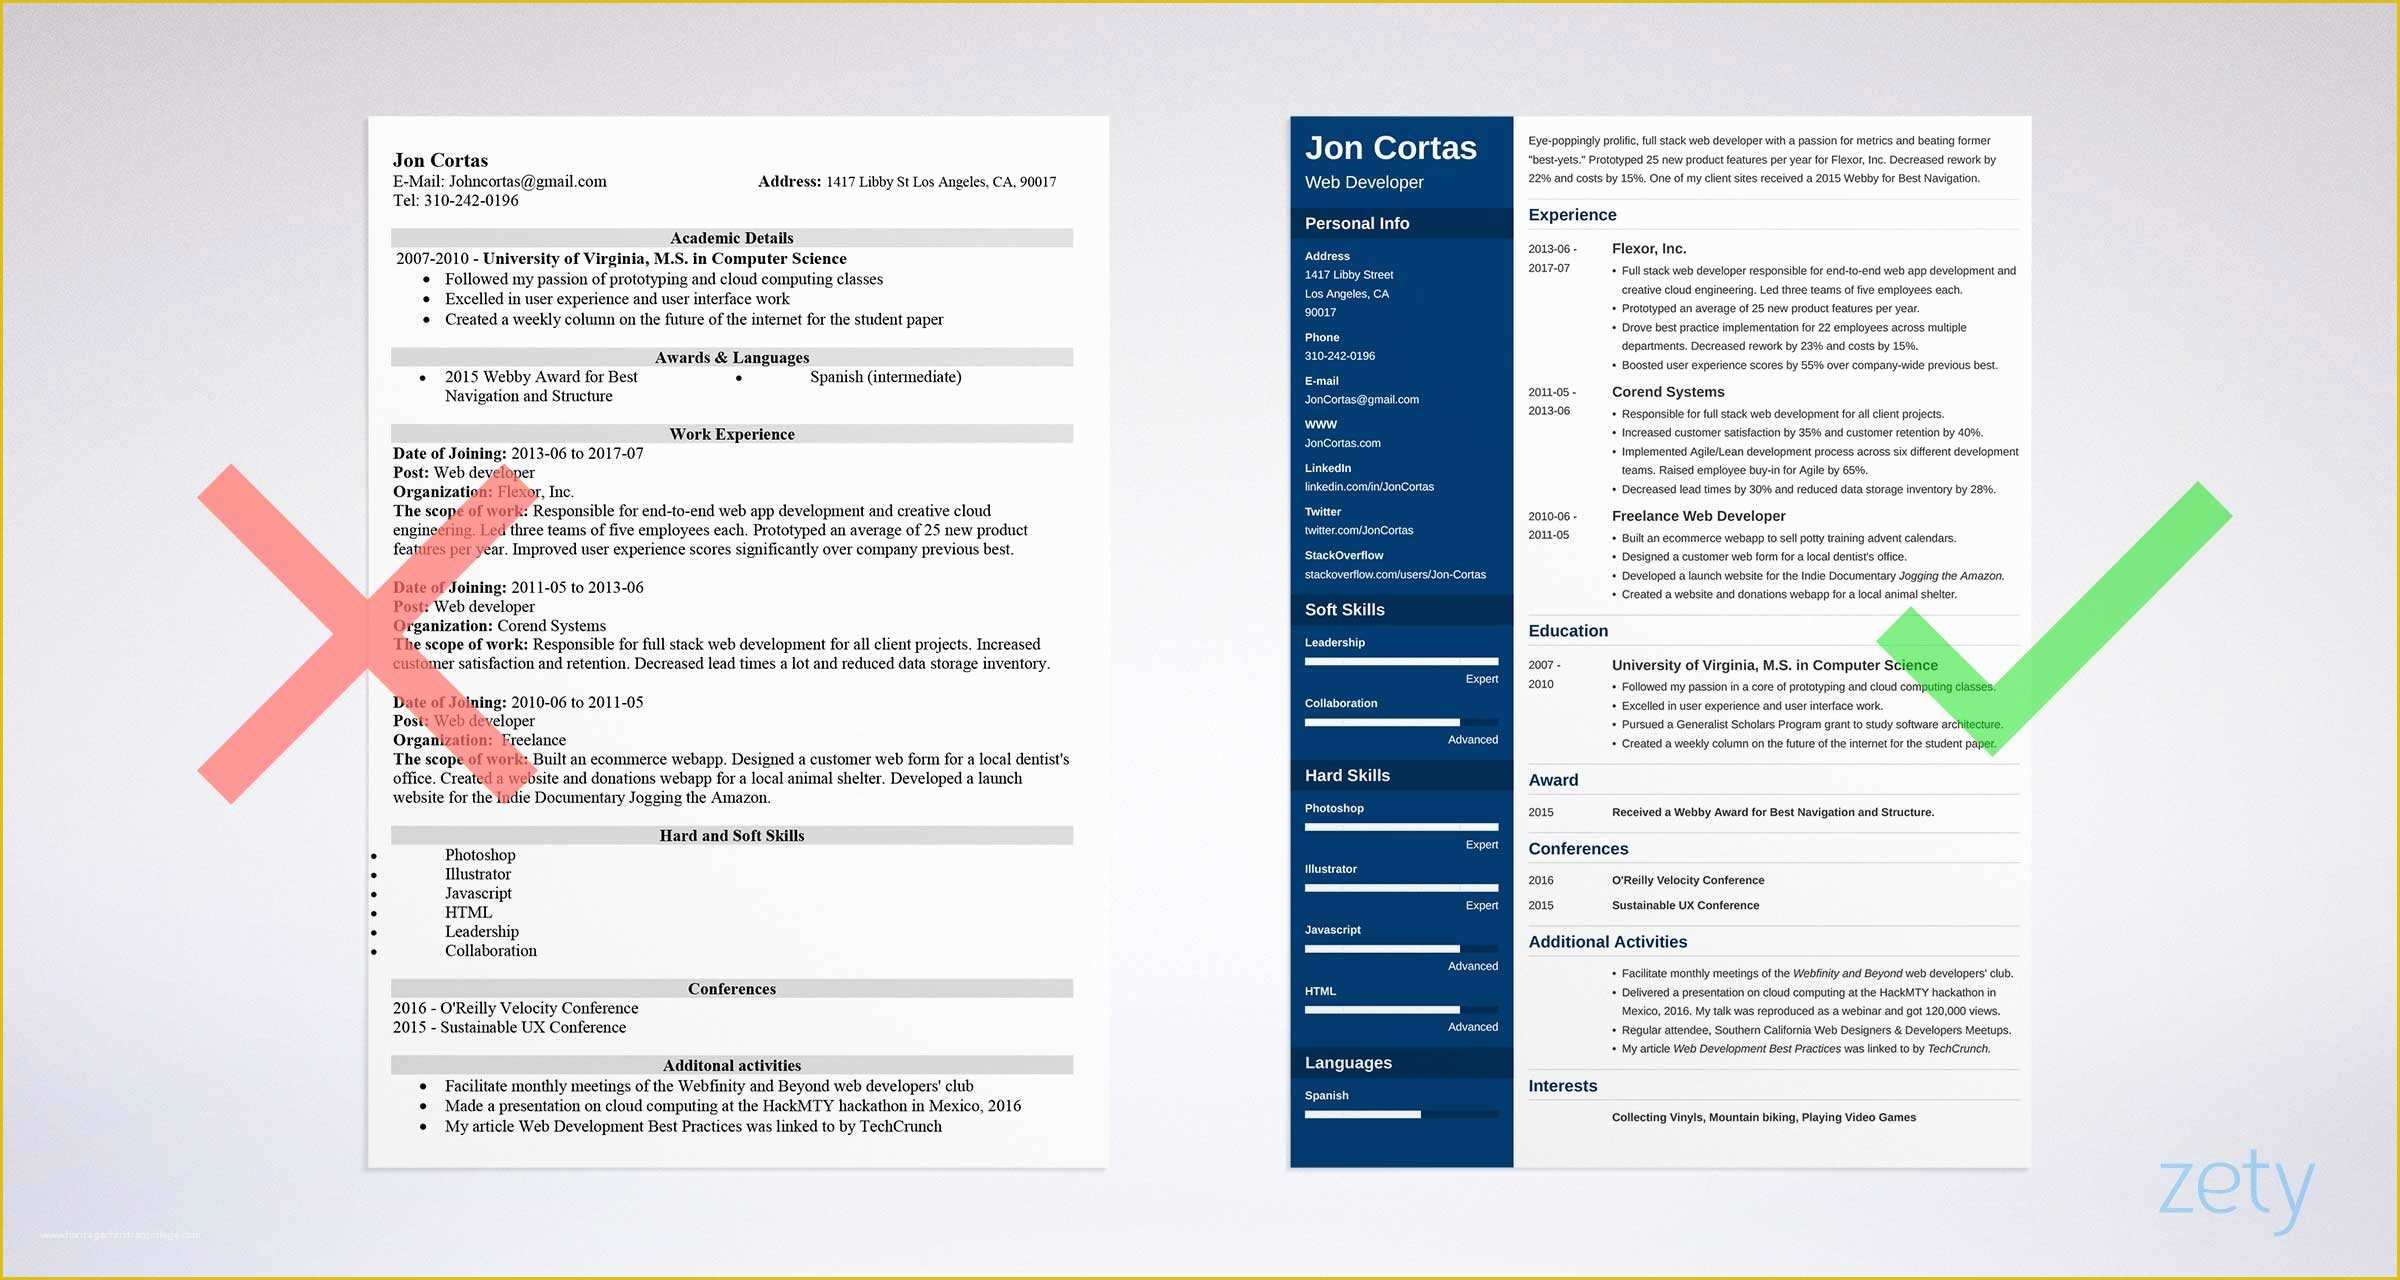 Free Cascade Resume Template Of Best Resume Templates 15 Examples to Download & Use Right